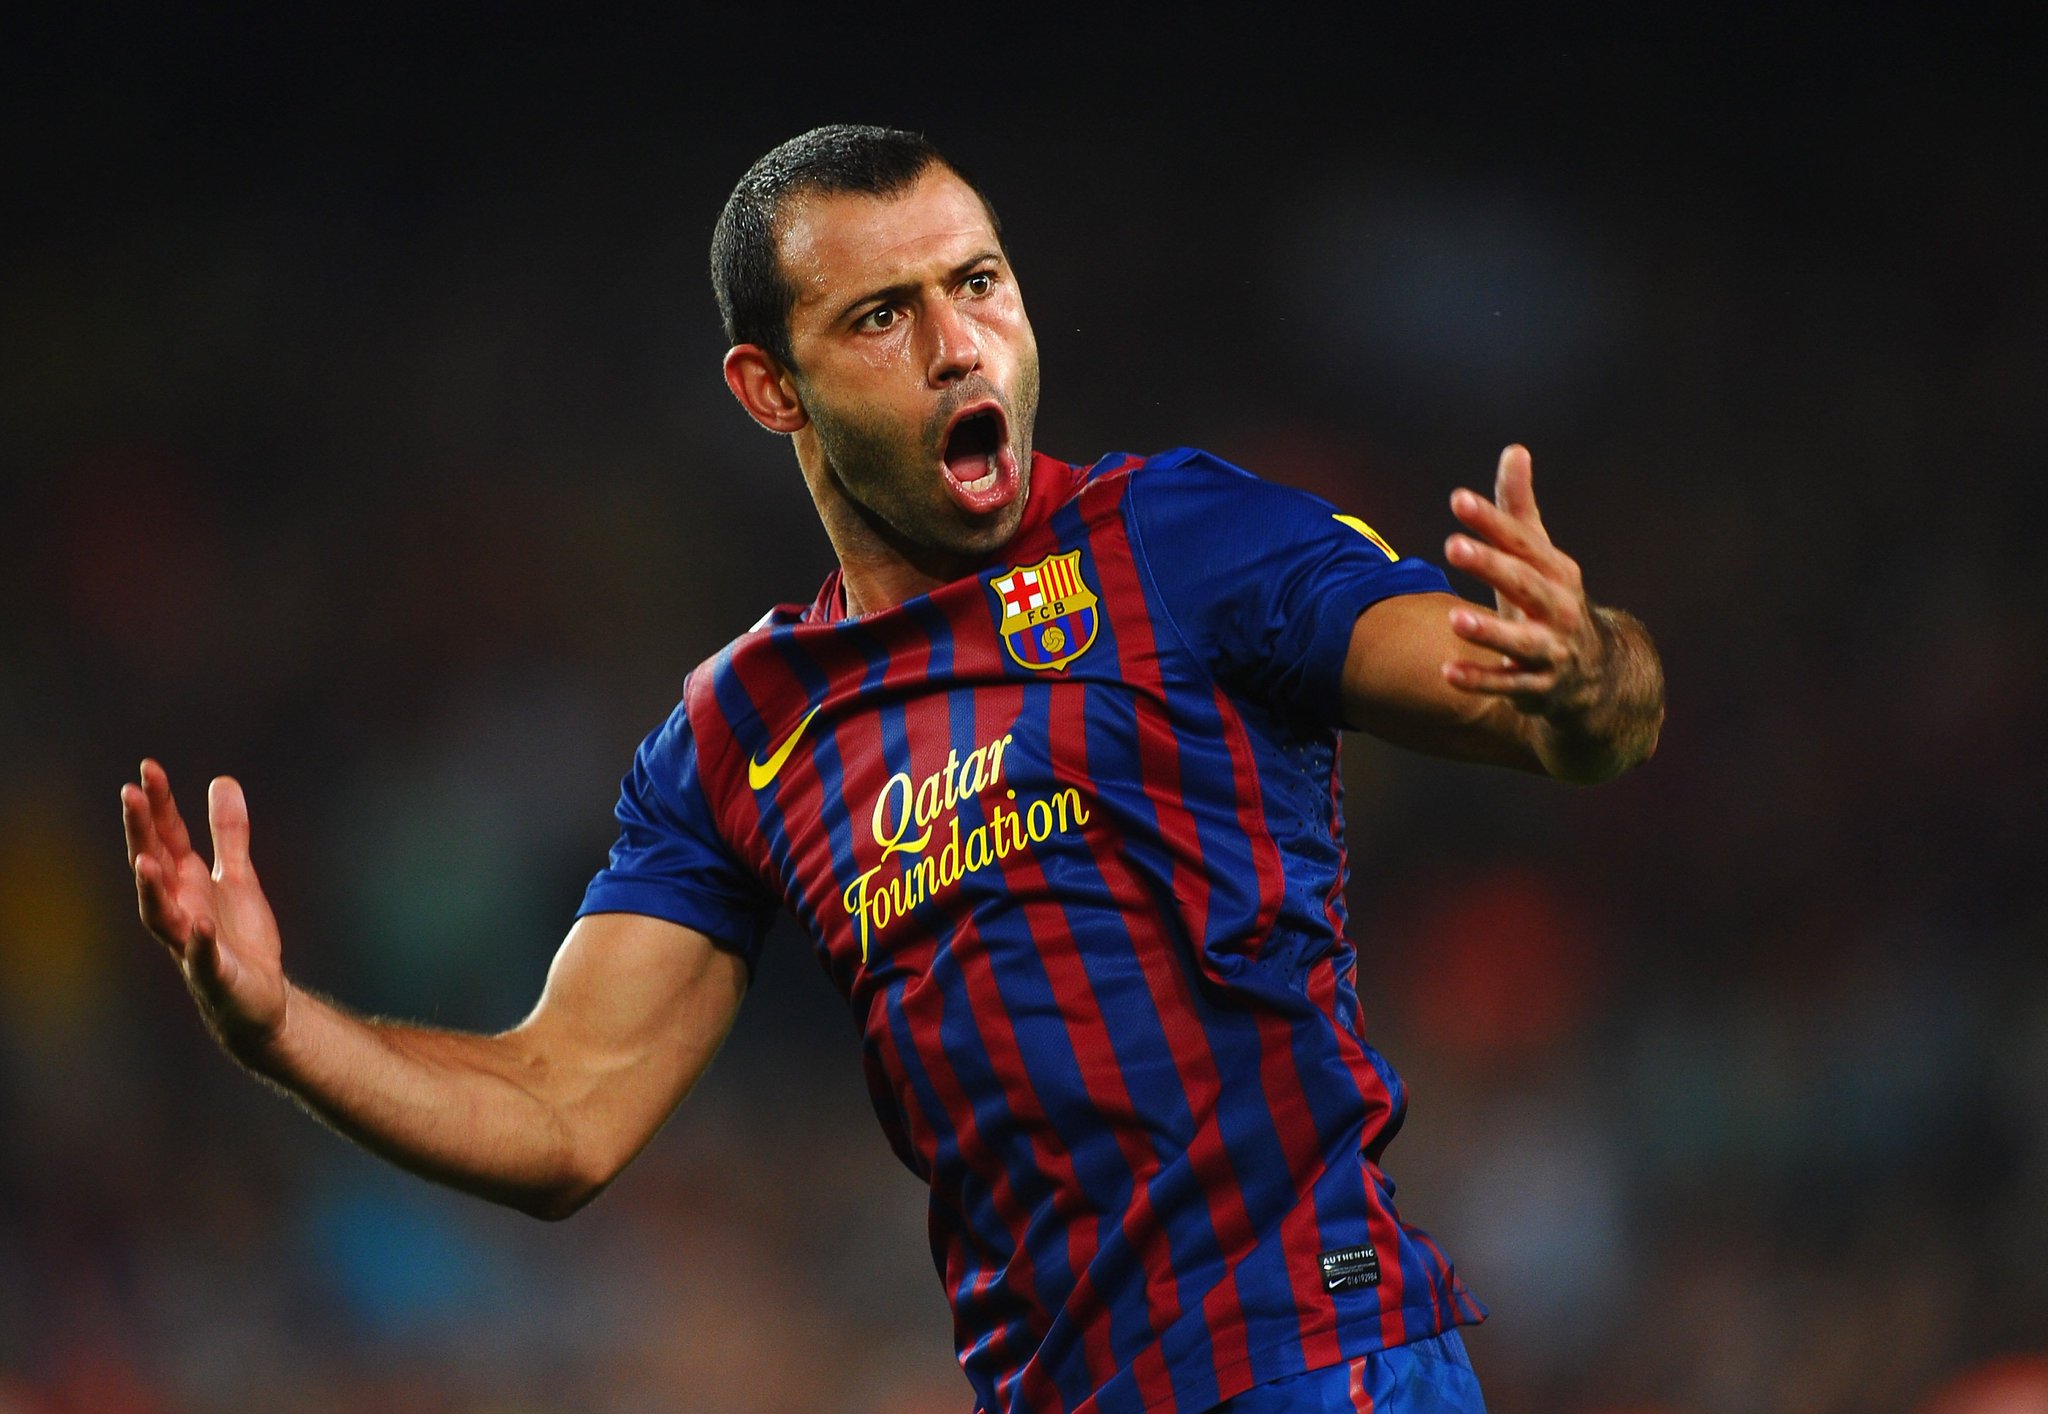 Happy 34th birthday to Javier Mascherano!

334 games for Barcelona 19 major trophies 1 goal  Left a legacy! 